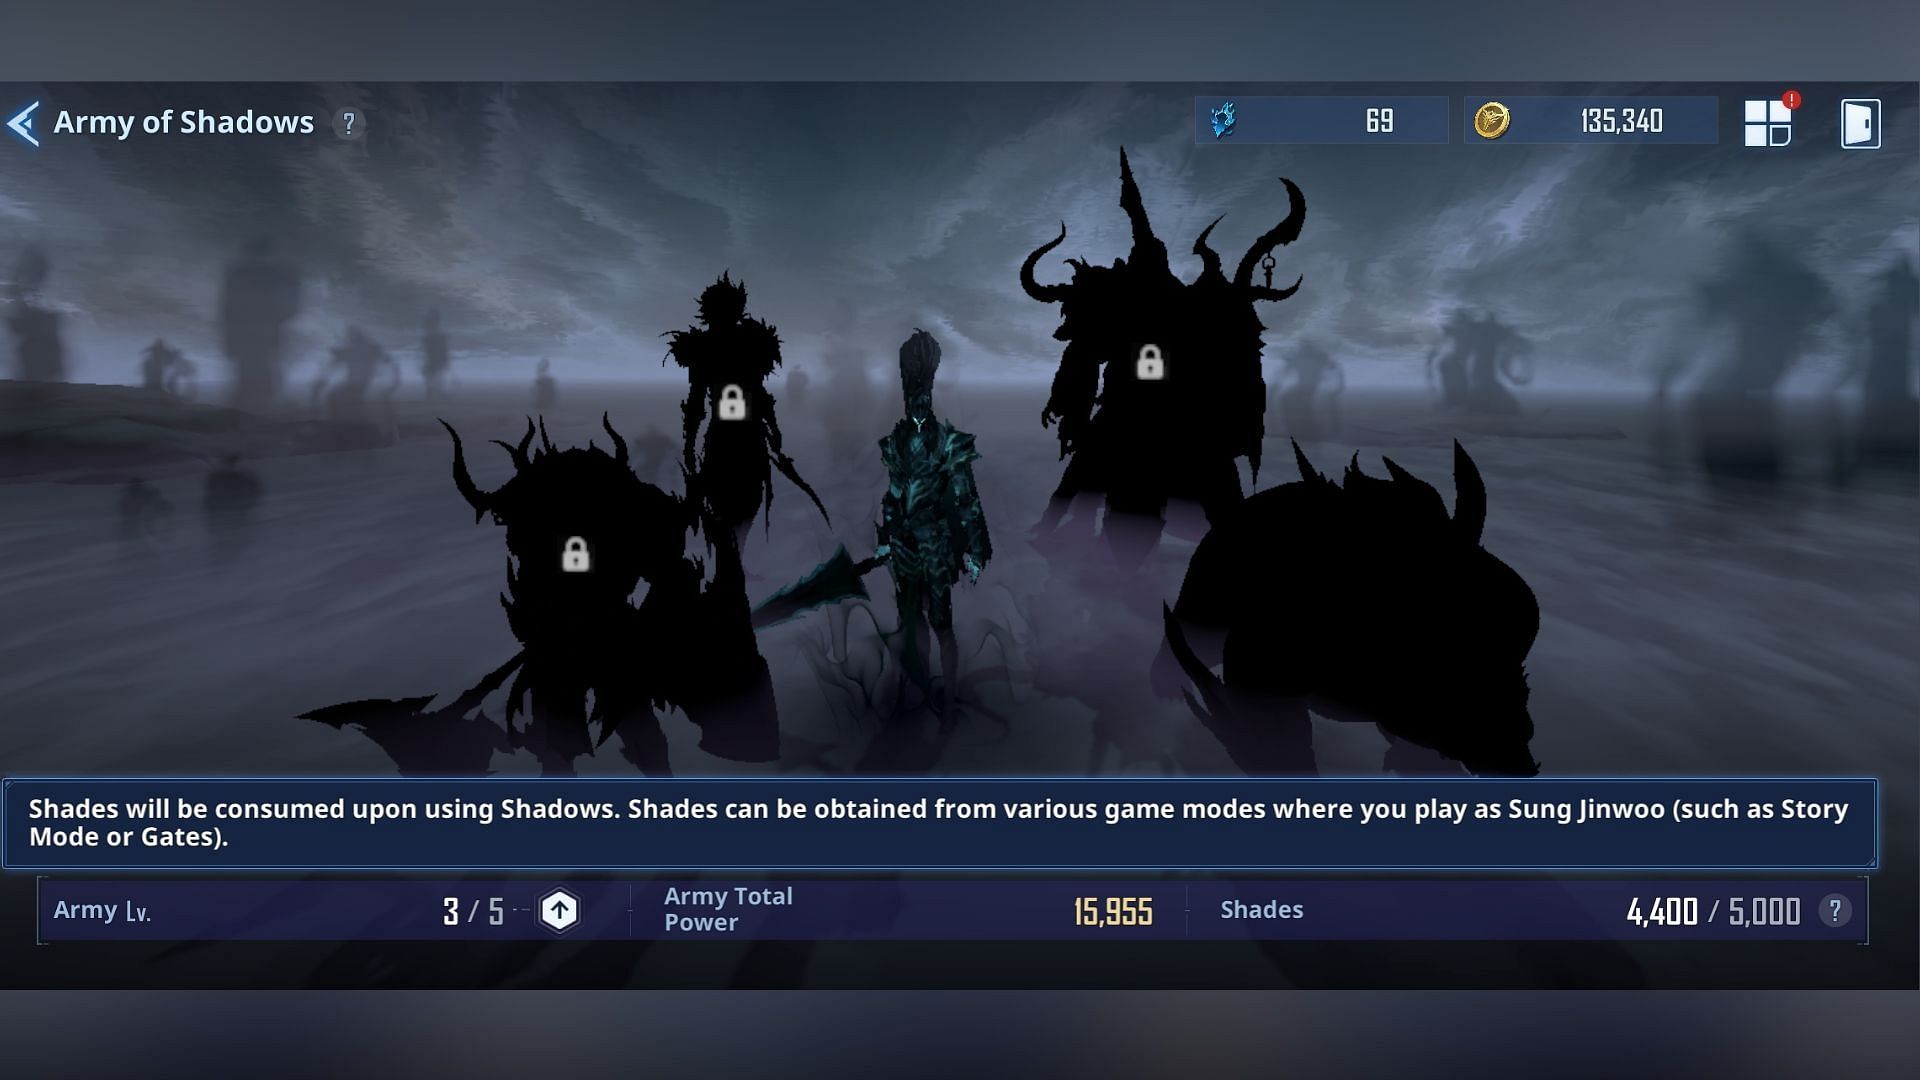 The Insufficient soldiers notification appears when there are no more Shades left to summon shadows on the battlefield. (Image via Netmarble)